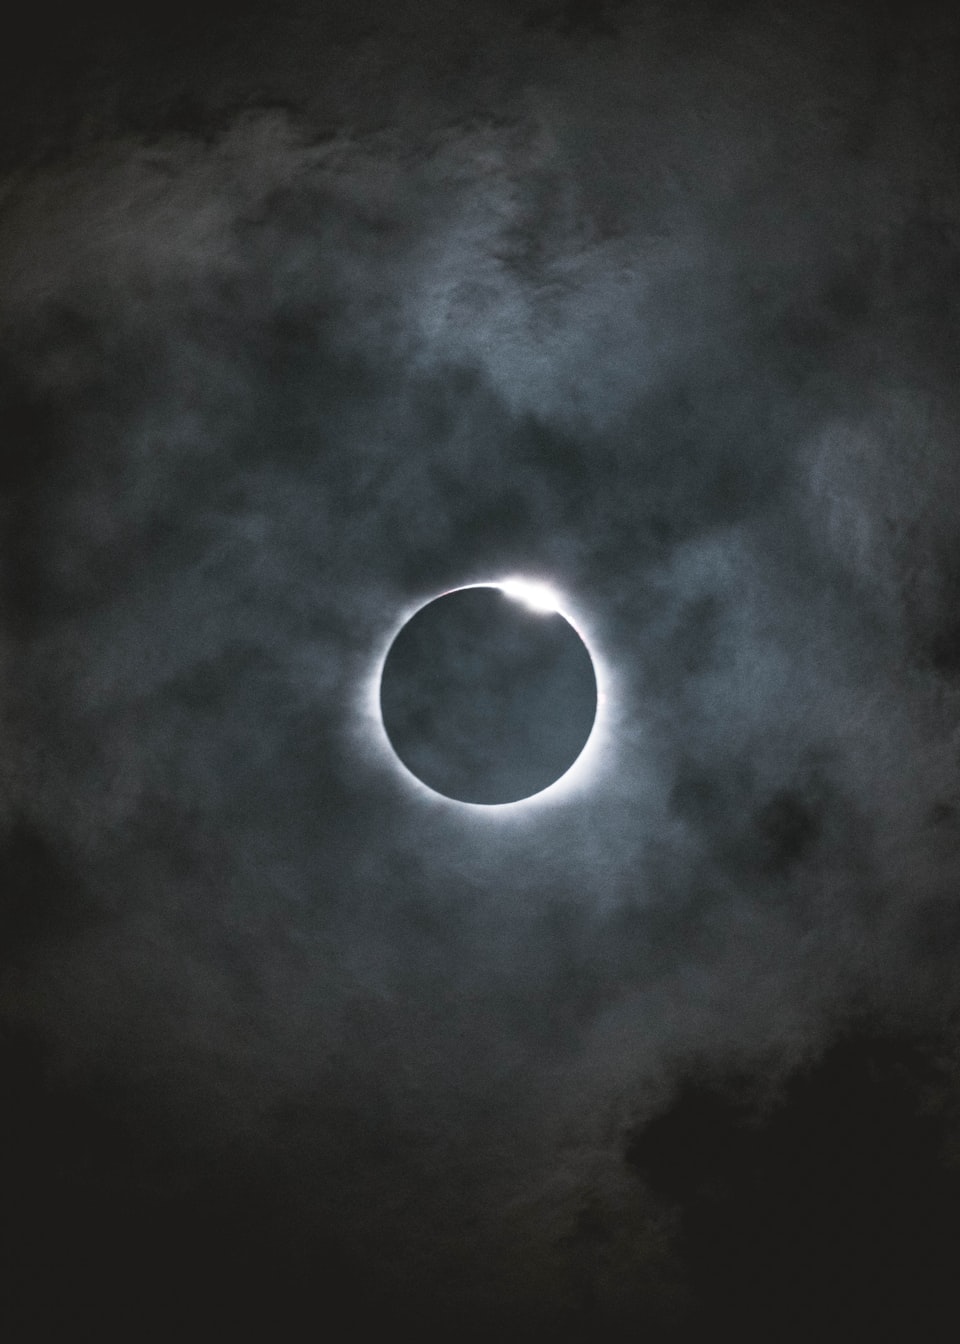 Image of the Sun cockblocking the moon through some clouds